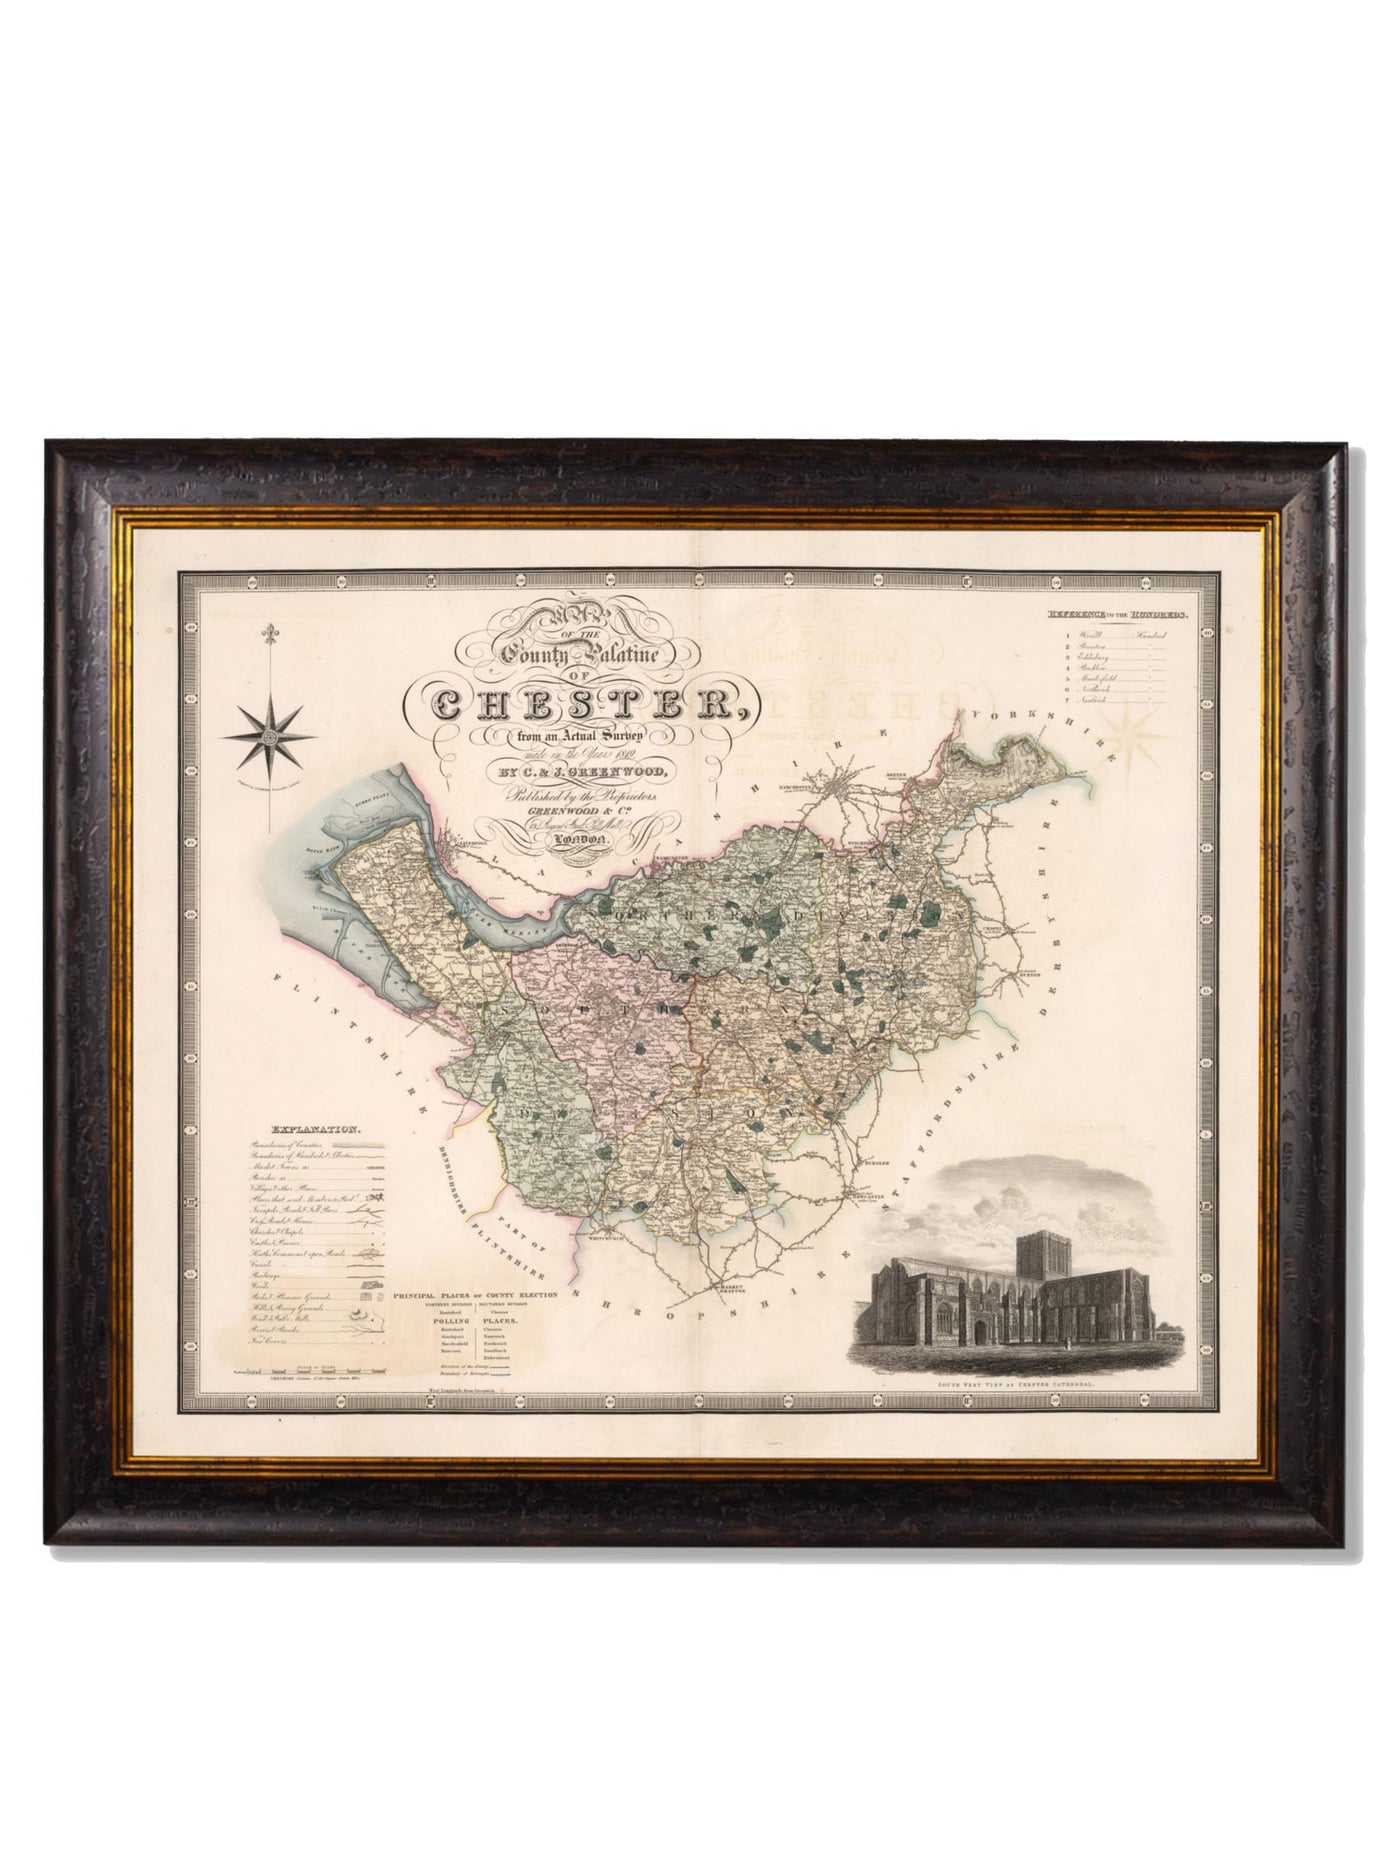 C.1830 County Maps of England - TheArtistsQuarter